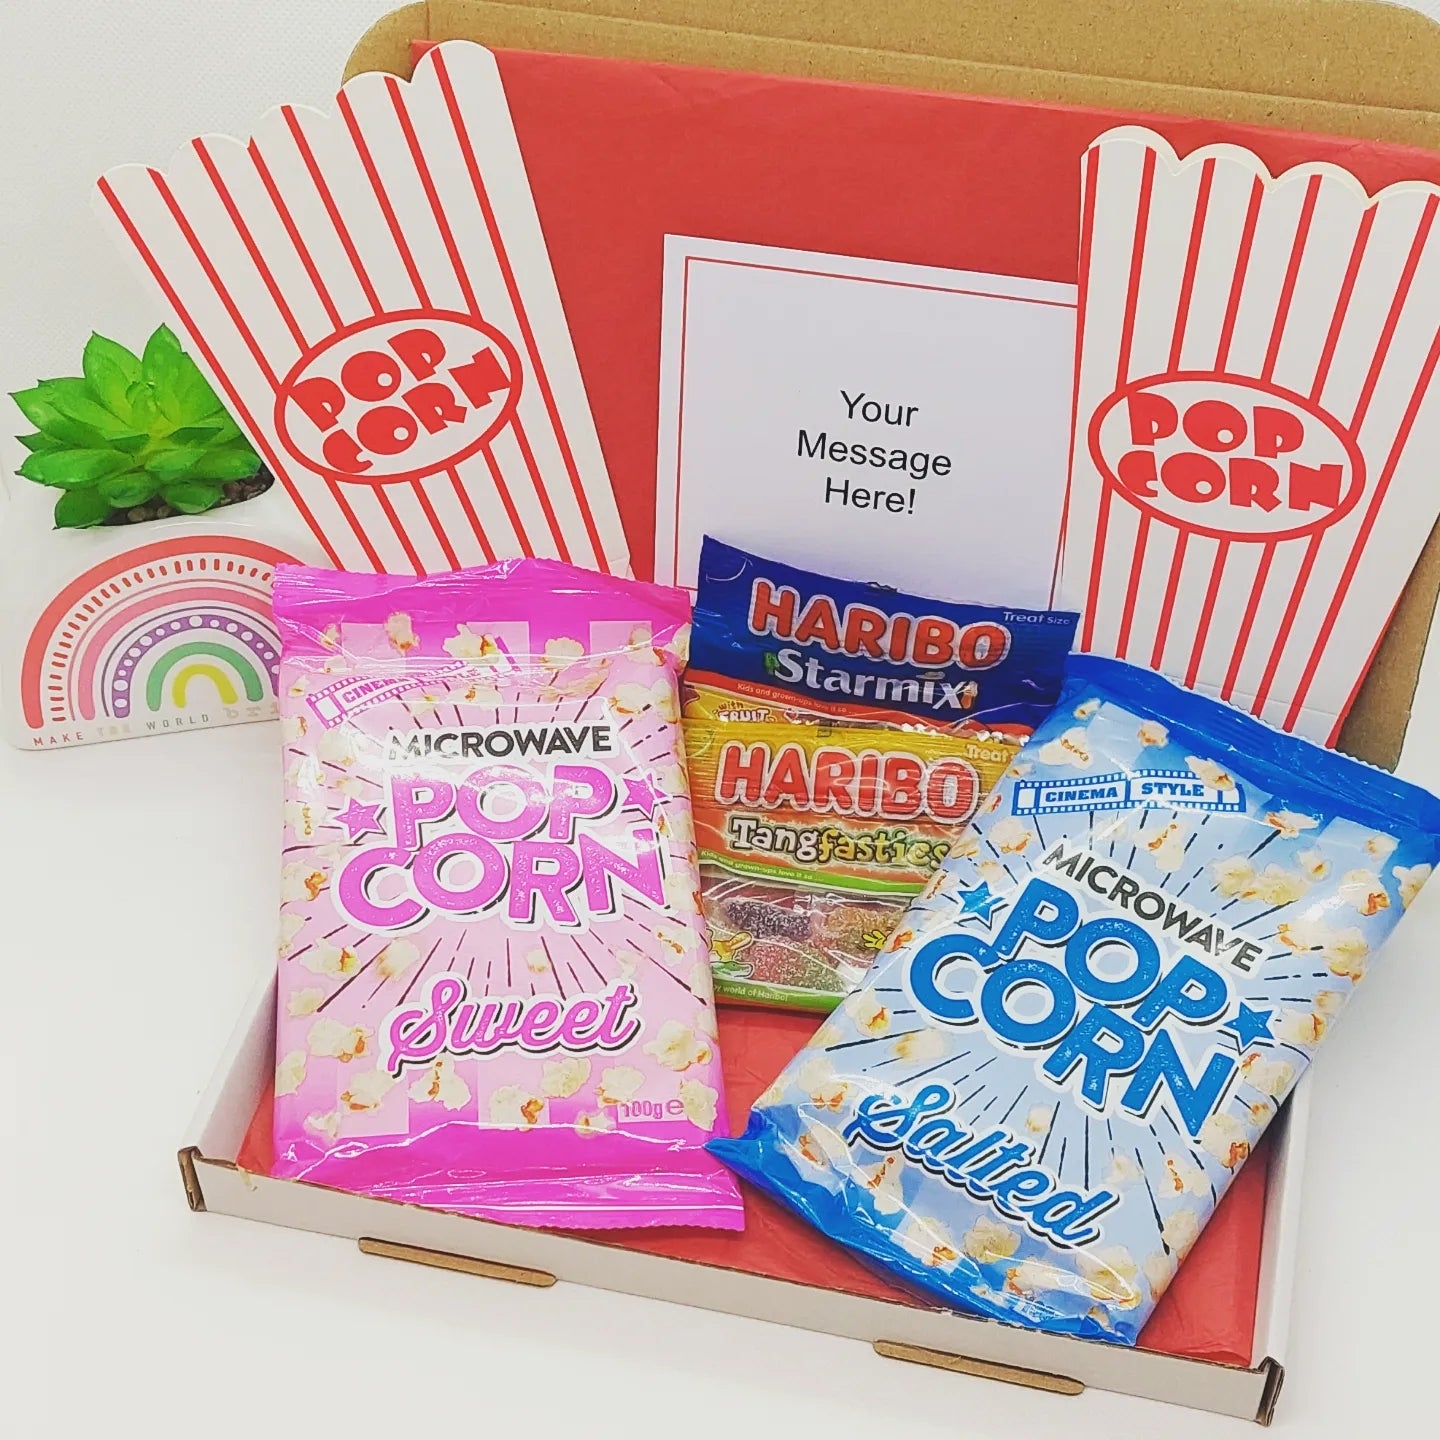 The Movie Night In Box – The Happiness Box